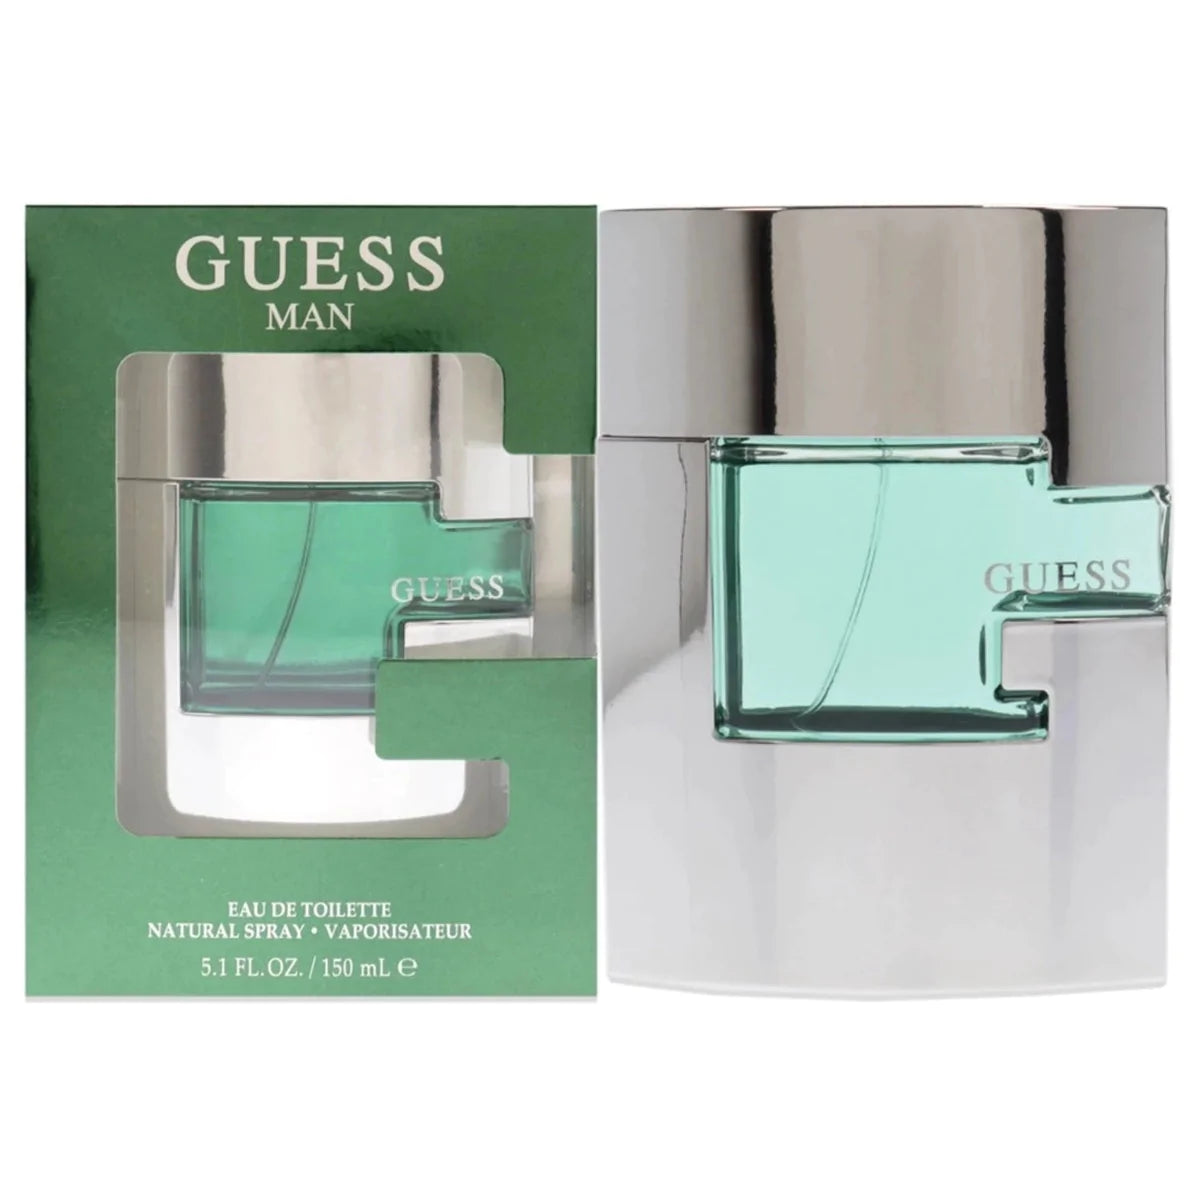 GUESS MAN EDT 150ml